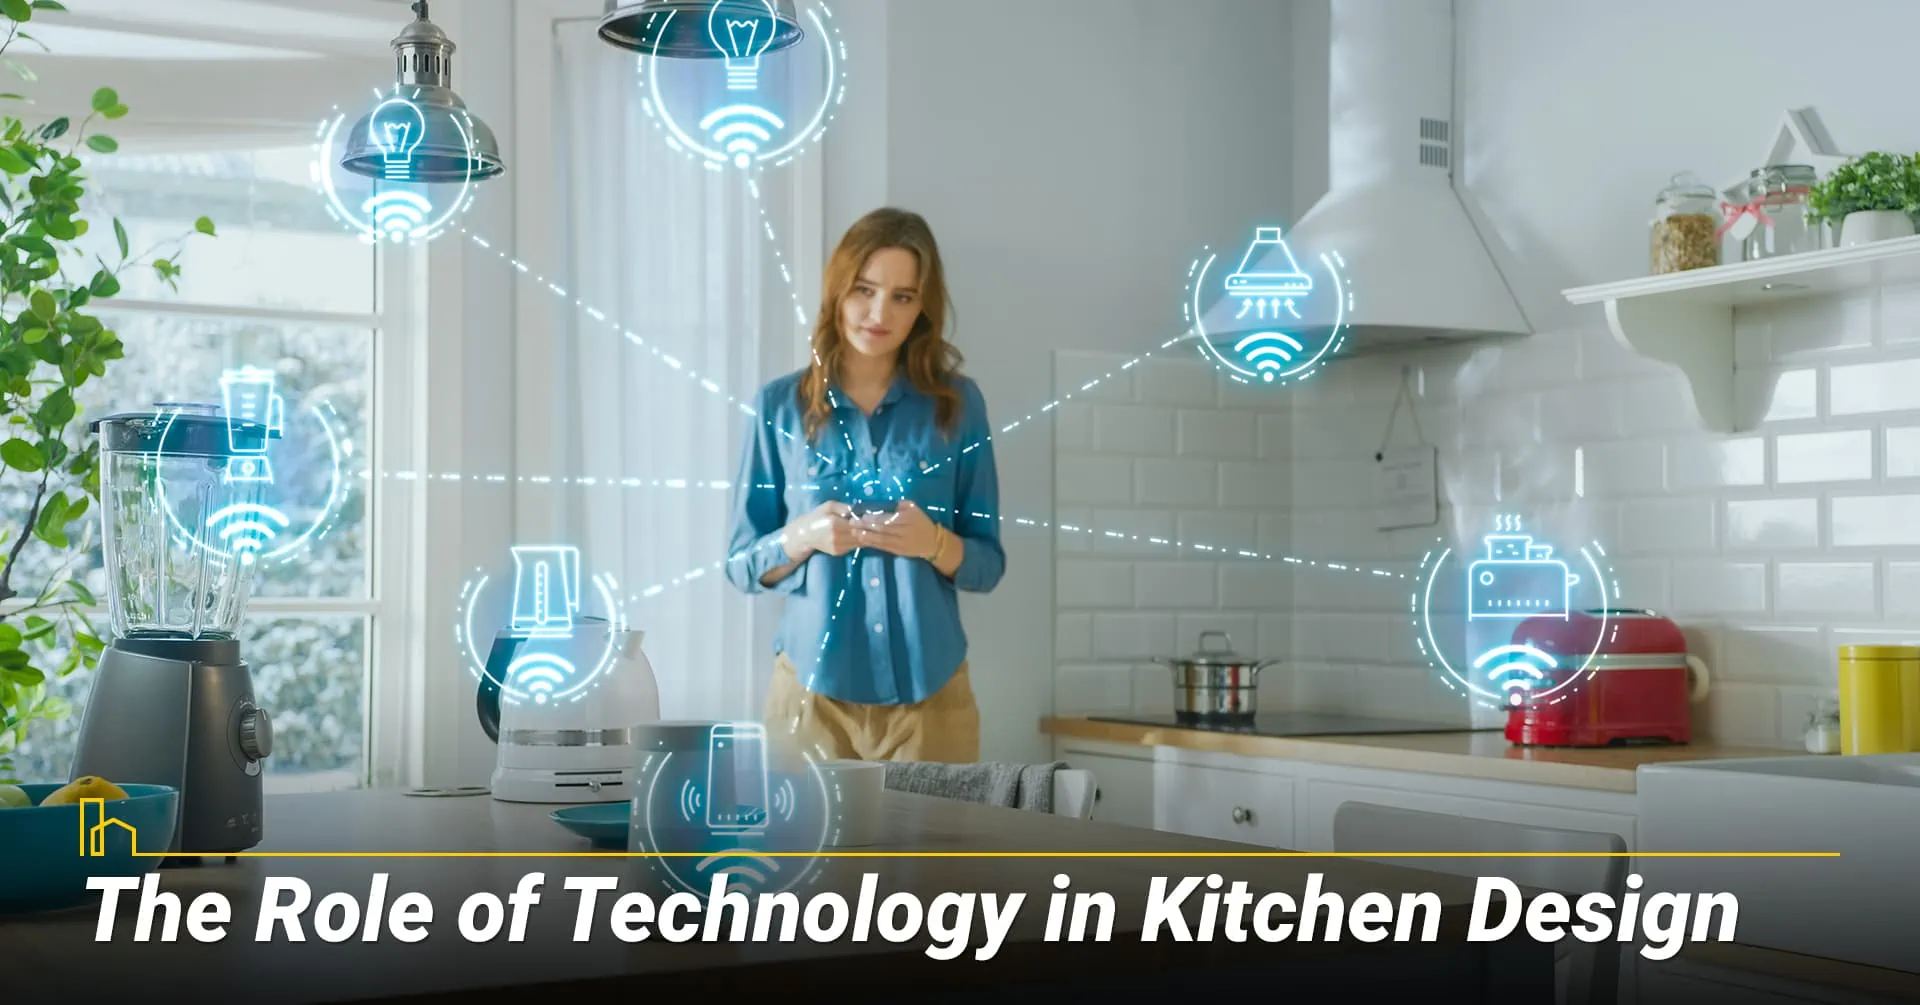 The Role of Technology in Kitchen Design